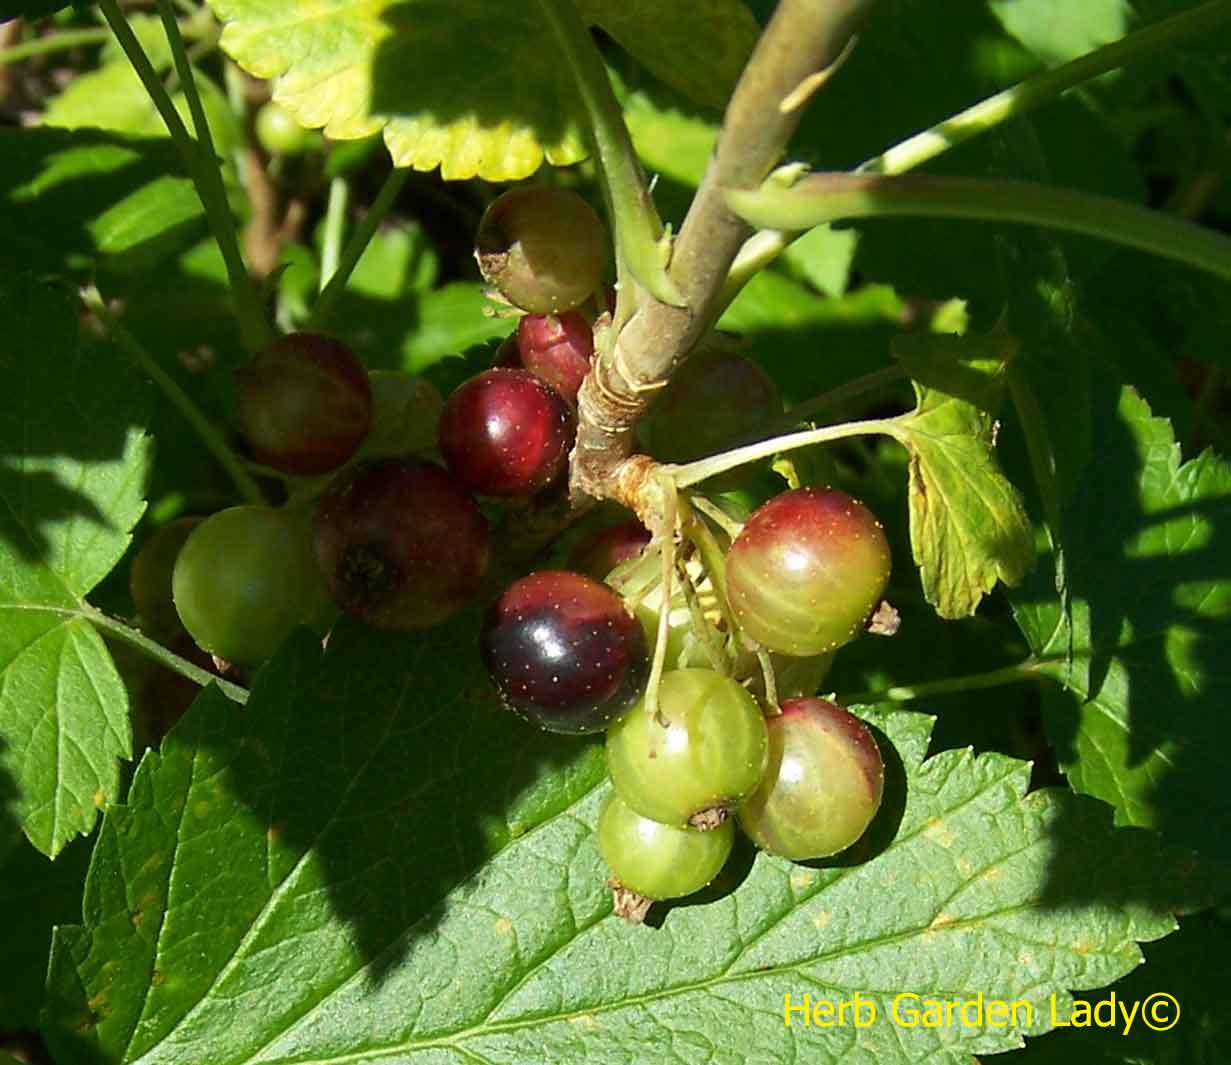 Black currants just starting to ripen